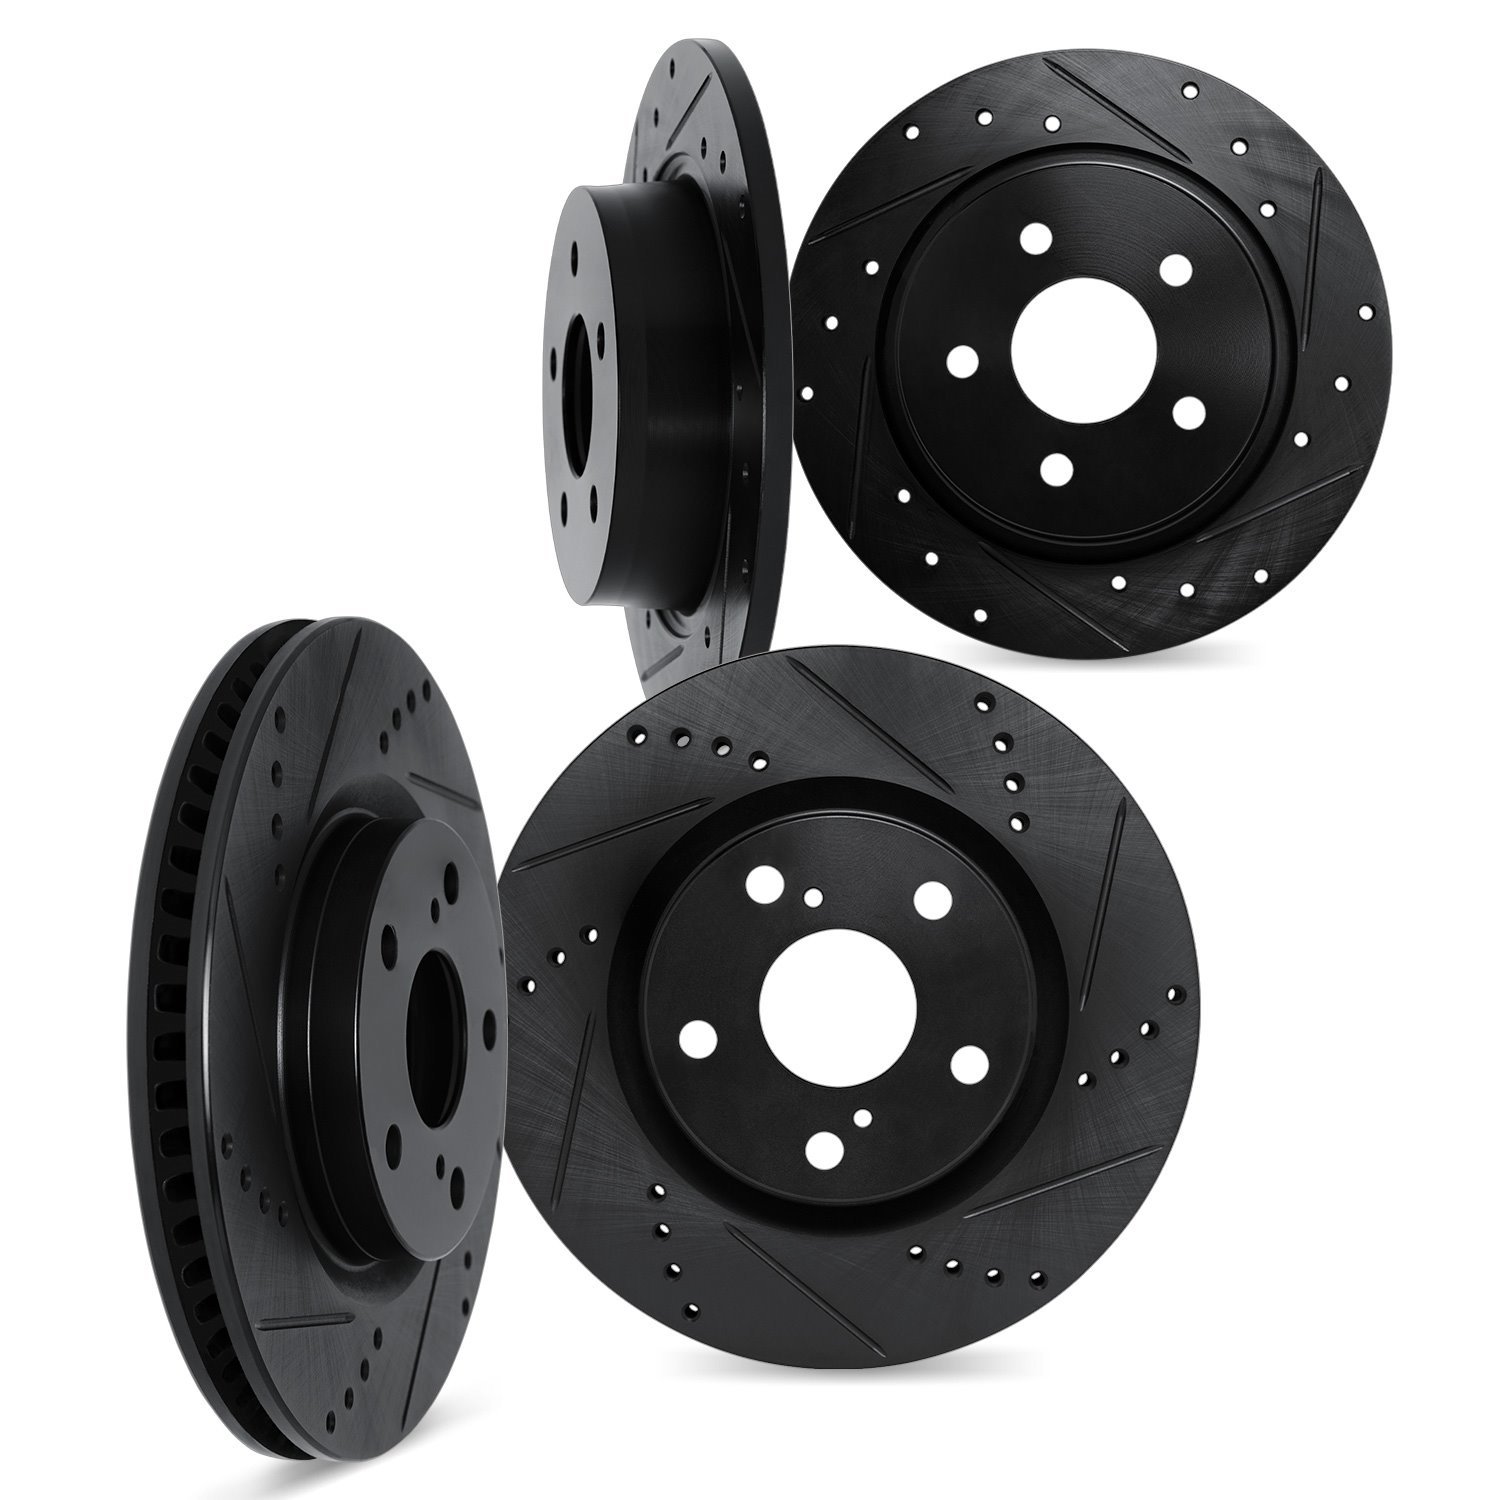 8004-59004 Drilled/Slotted Brake Rotors [Black], 2006-2015 Acura/Honda, Position: Front and Rear